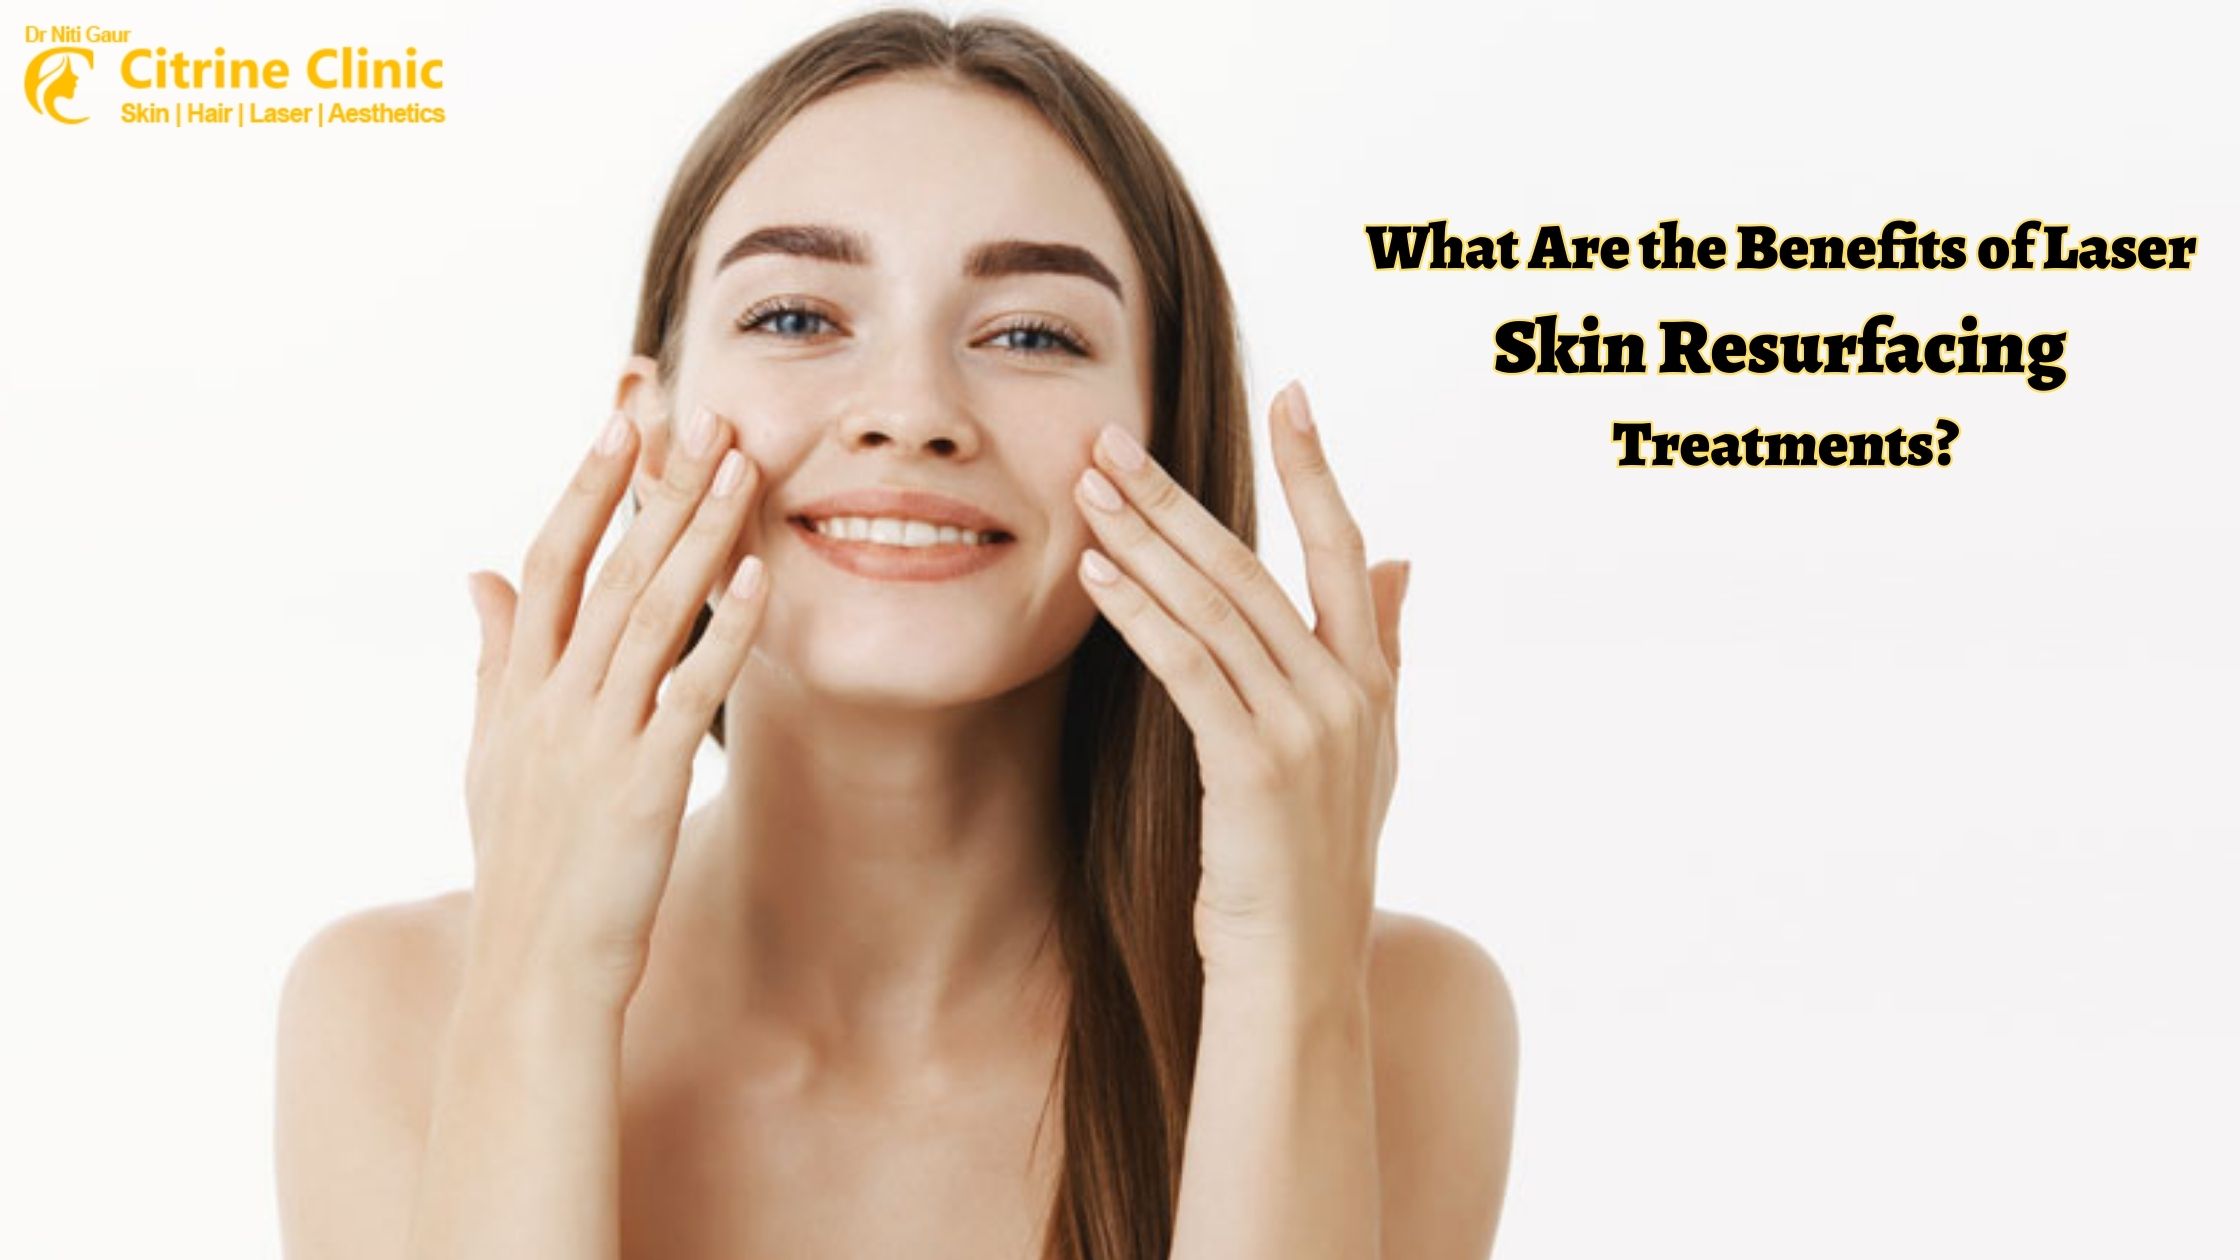 What Are the Benefits of Laser Skin Resurfacing Treatments